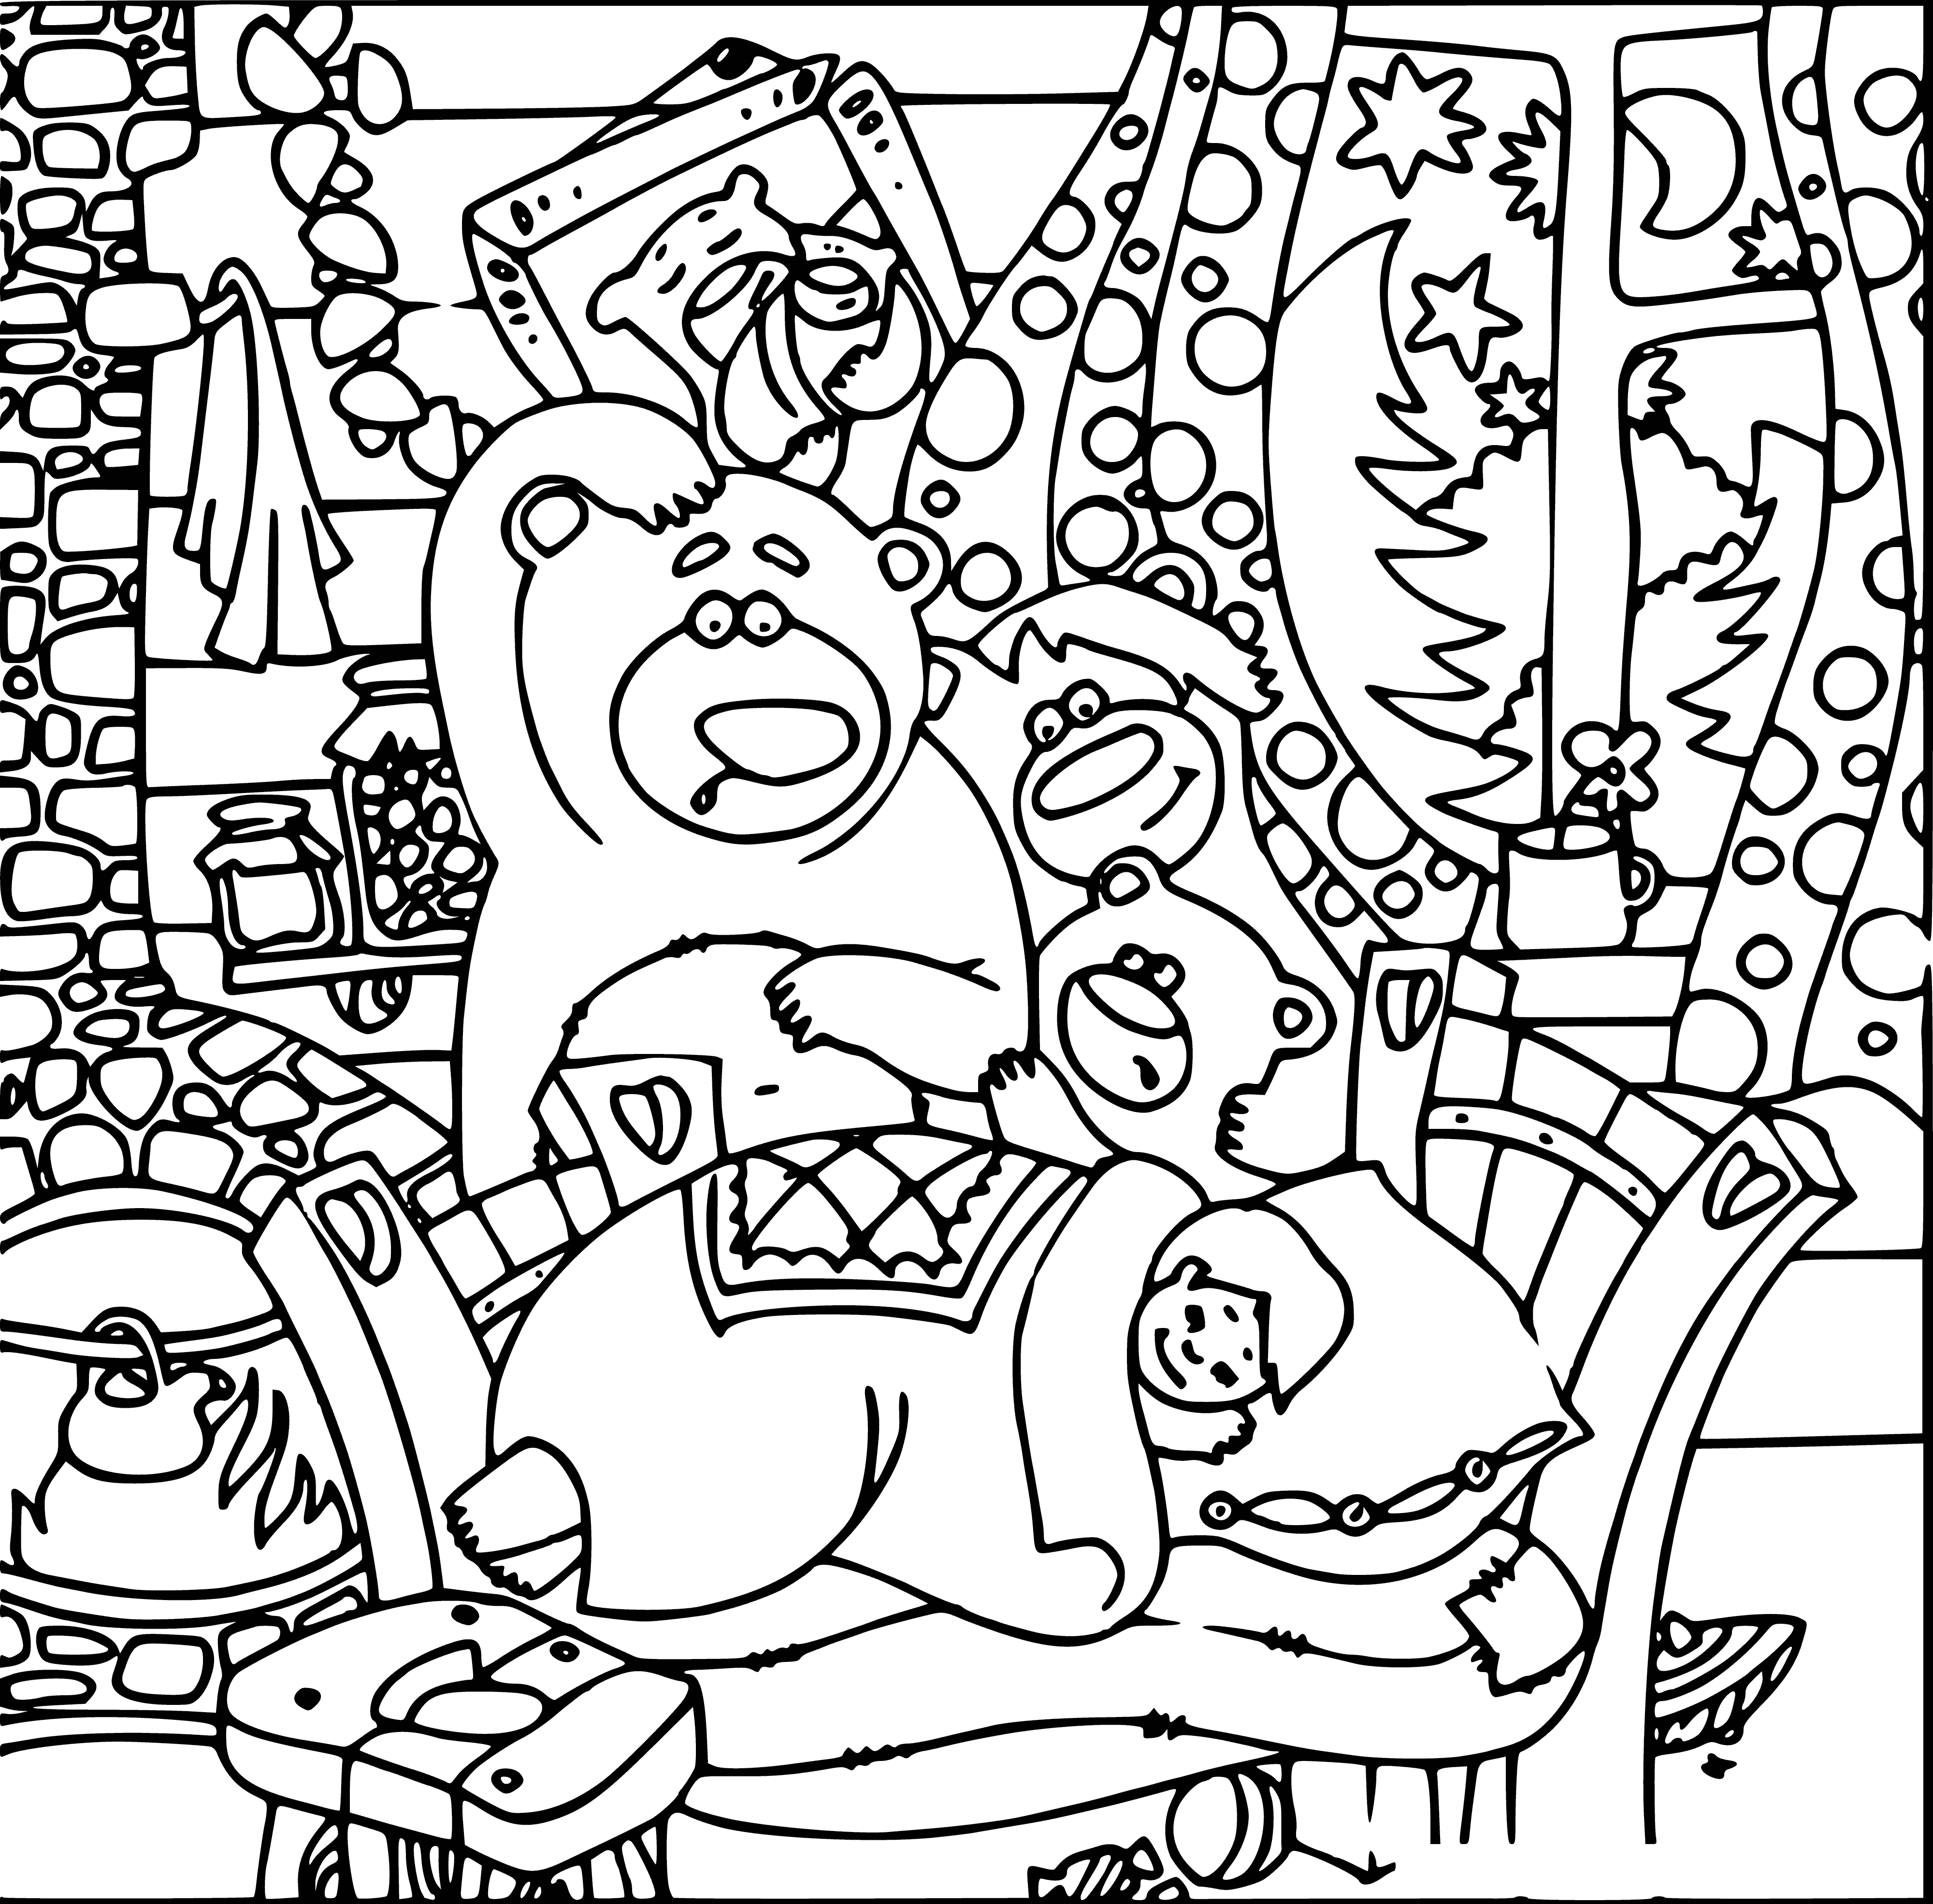 Three Bears coloring page